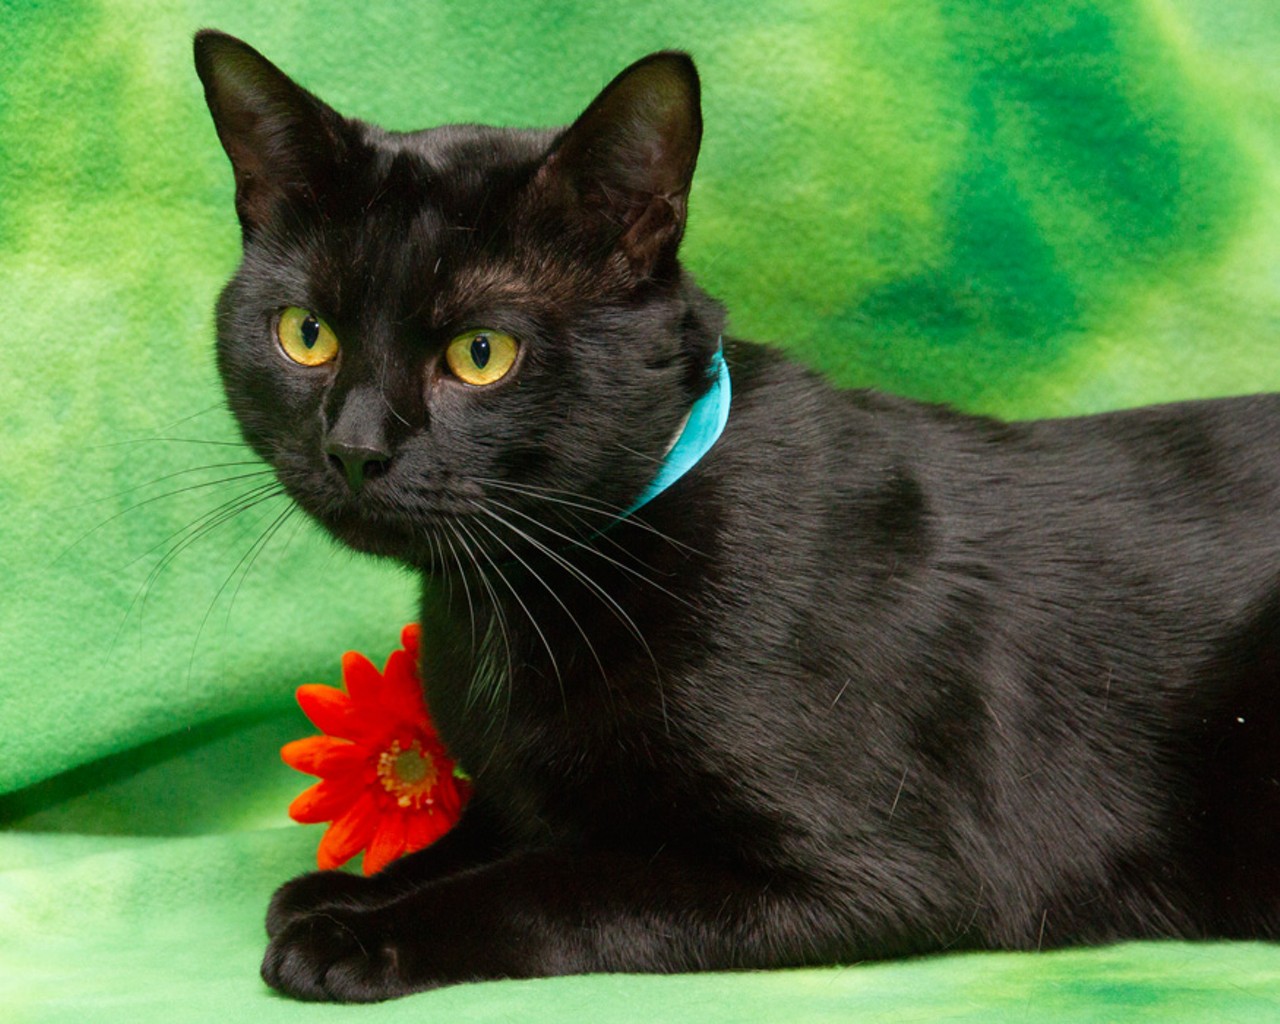 NAME: Bolt
GENDER: Male
BREED: Domestic Short Hair
AGE: 3 years
WEIGHT: 12 pounds
SPECIAL CONSIDERATIONS: Bolt may prefer a home with older children.
REASON I CAME TO MHS: Homeless in Livonia
LOCATION: Premier Pet Supply of Novi
ID NUMBER: 868952